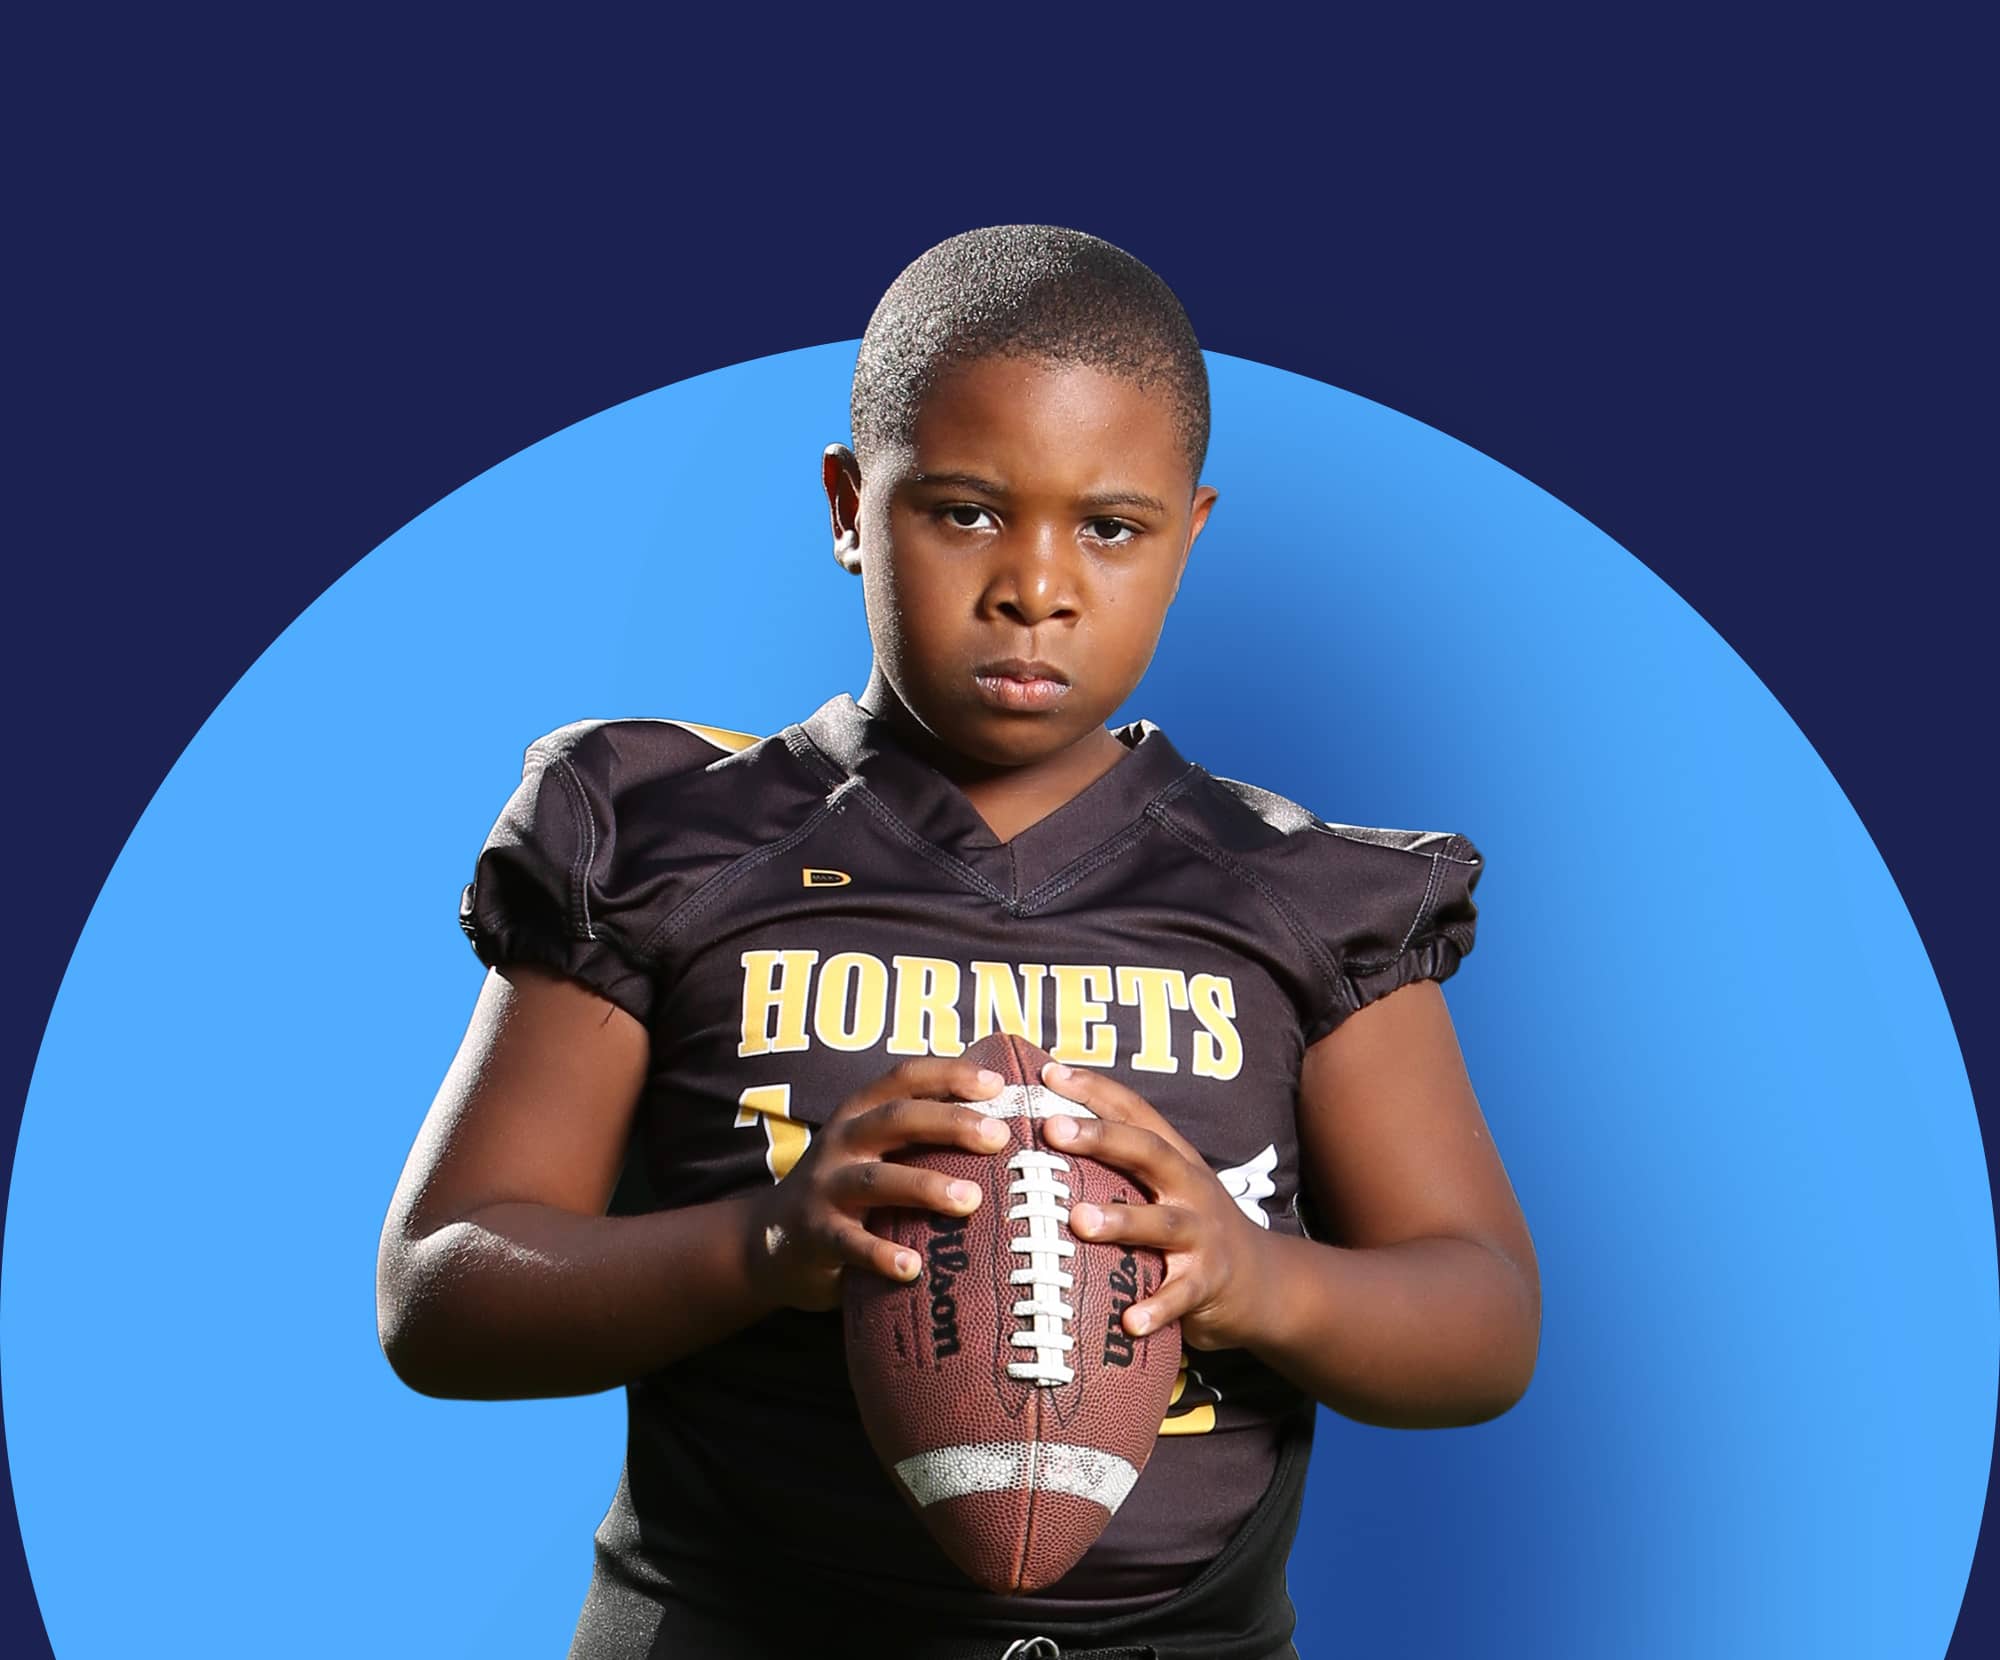 A boy holding a football during sports photoshoot day